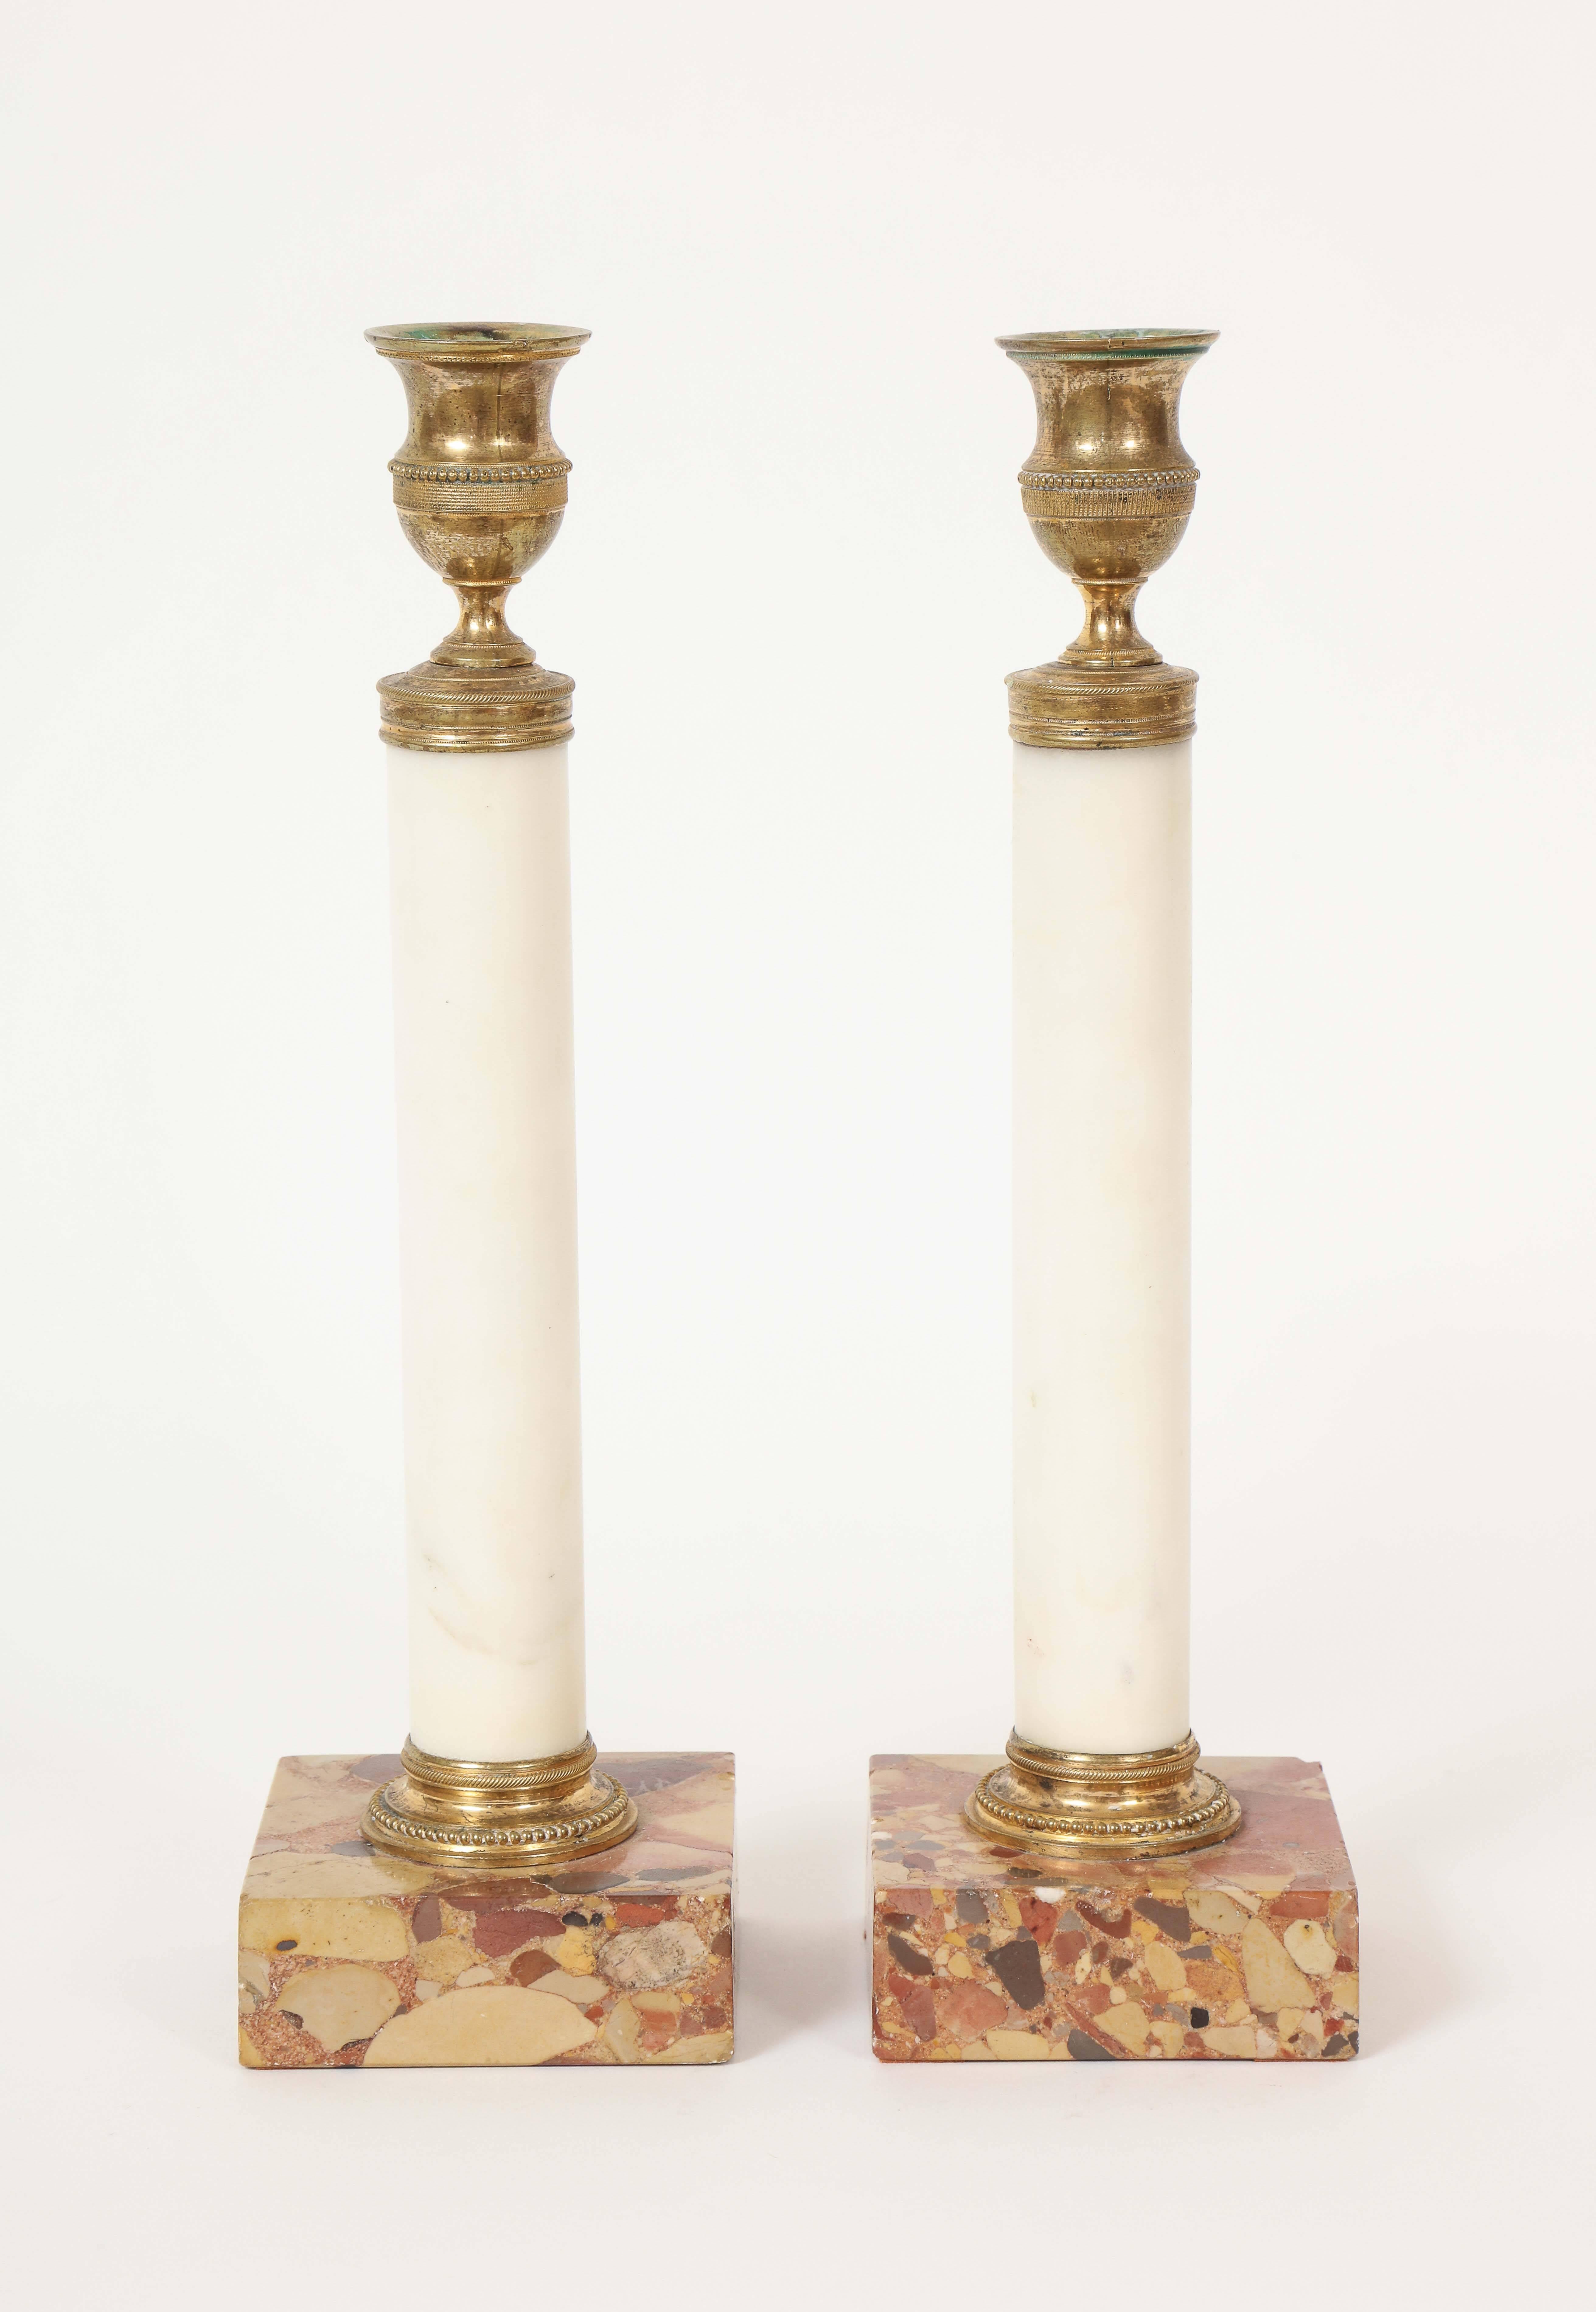 This pair of Swedish Gustav III period neoclassical candlesticks is each columnar in form, with a gilded bronze urn form candle bobeches, raised on a white marble column, with gilded bronze molded base, supported by a square mottled marble (breche